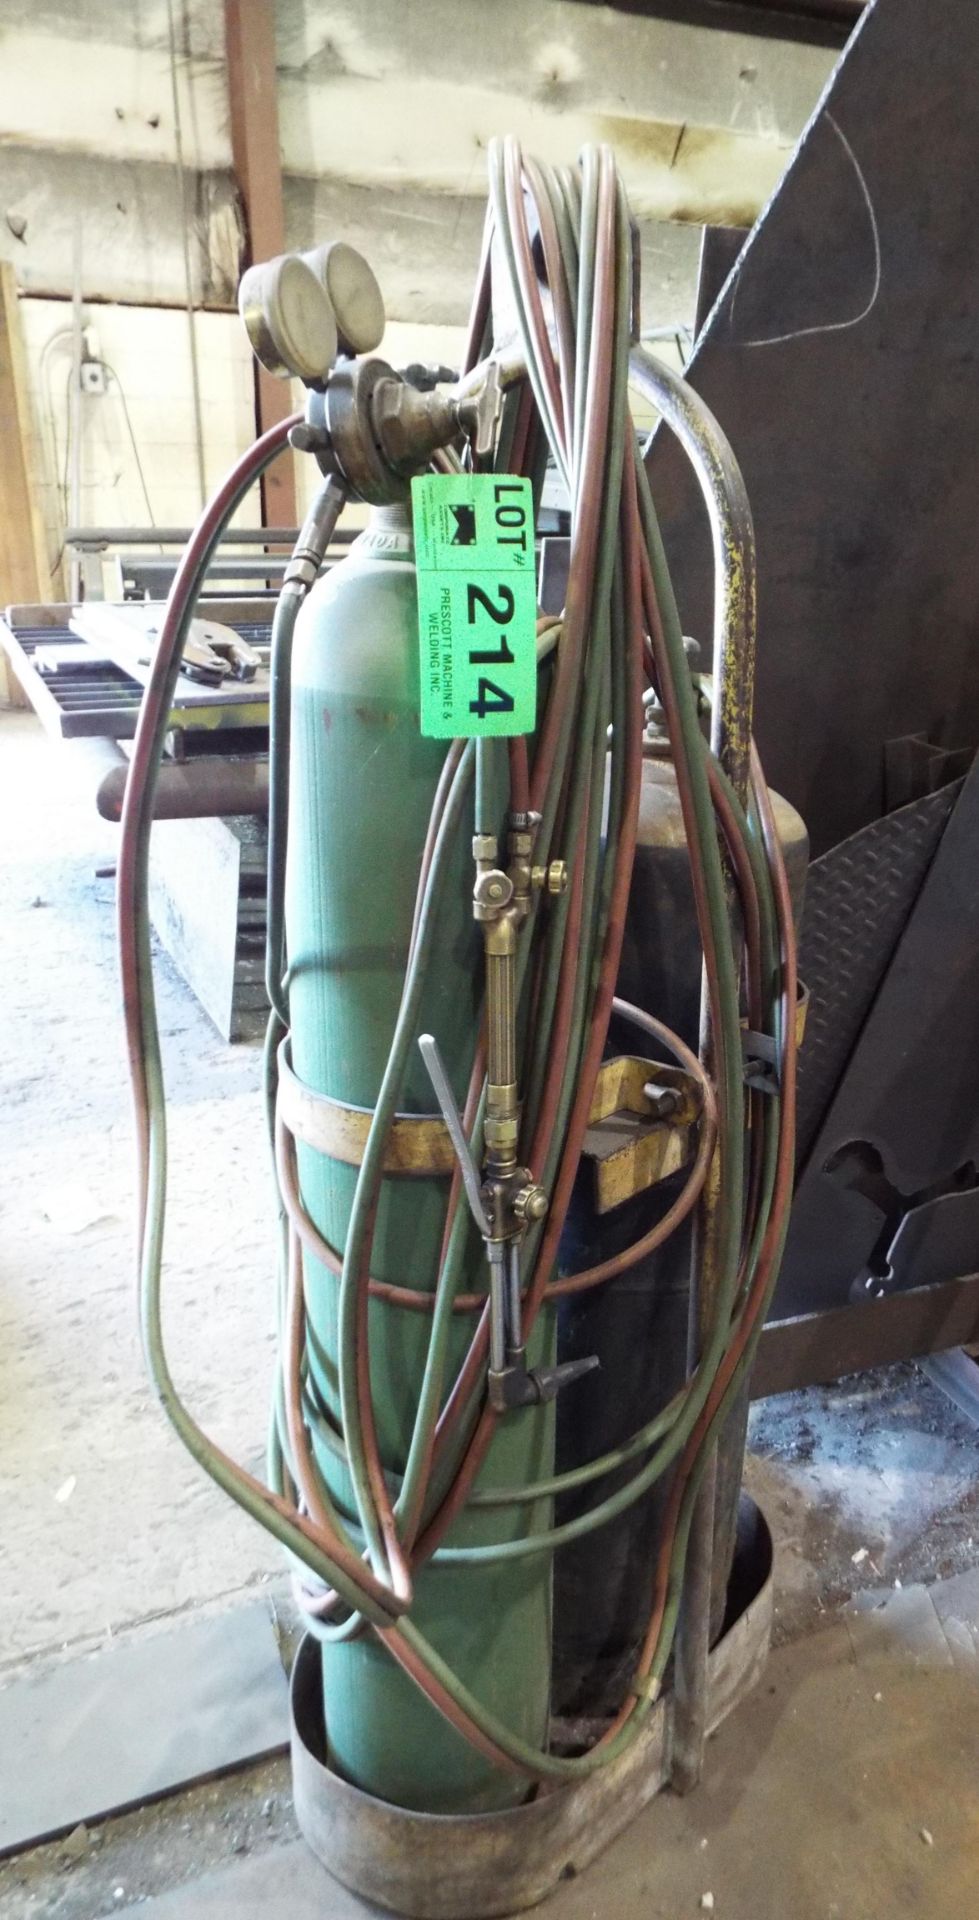 LOT/ OXY-ACETYLENE TANK CADDY WITH TORCH, GAUGES & HOSE (NO TANKS)